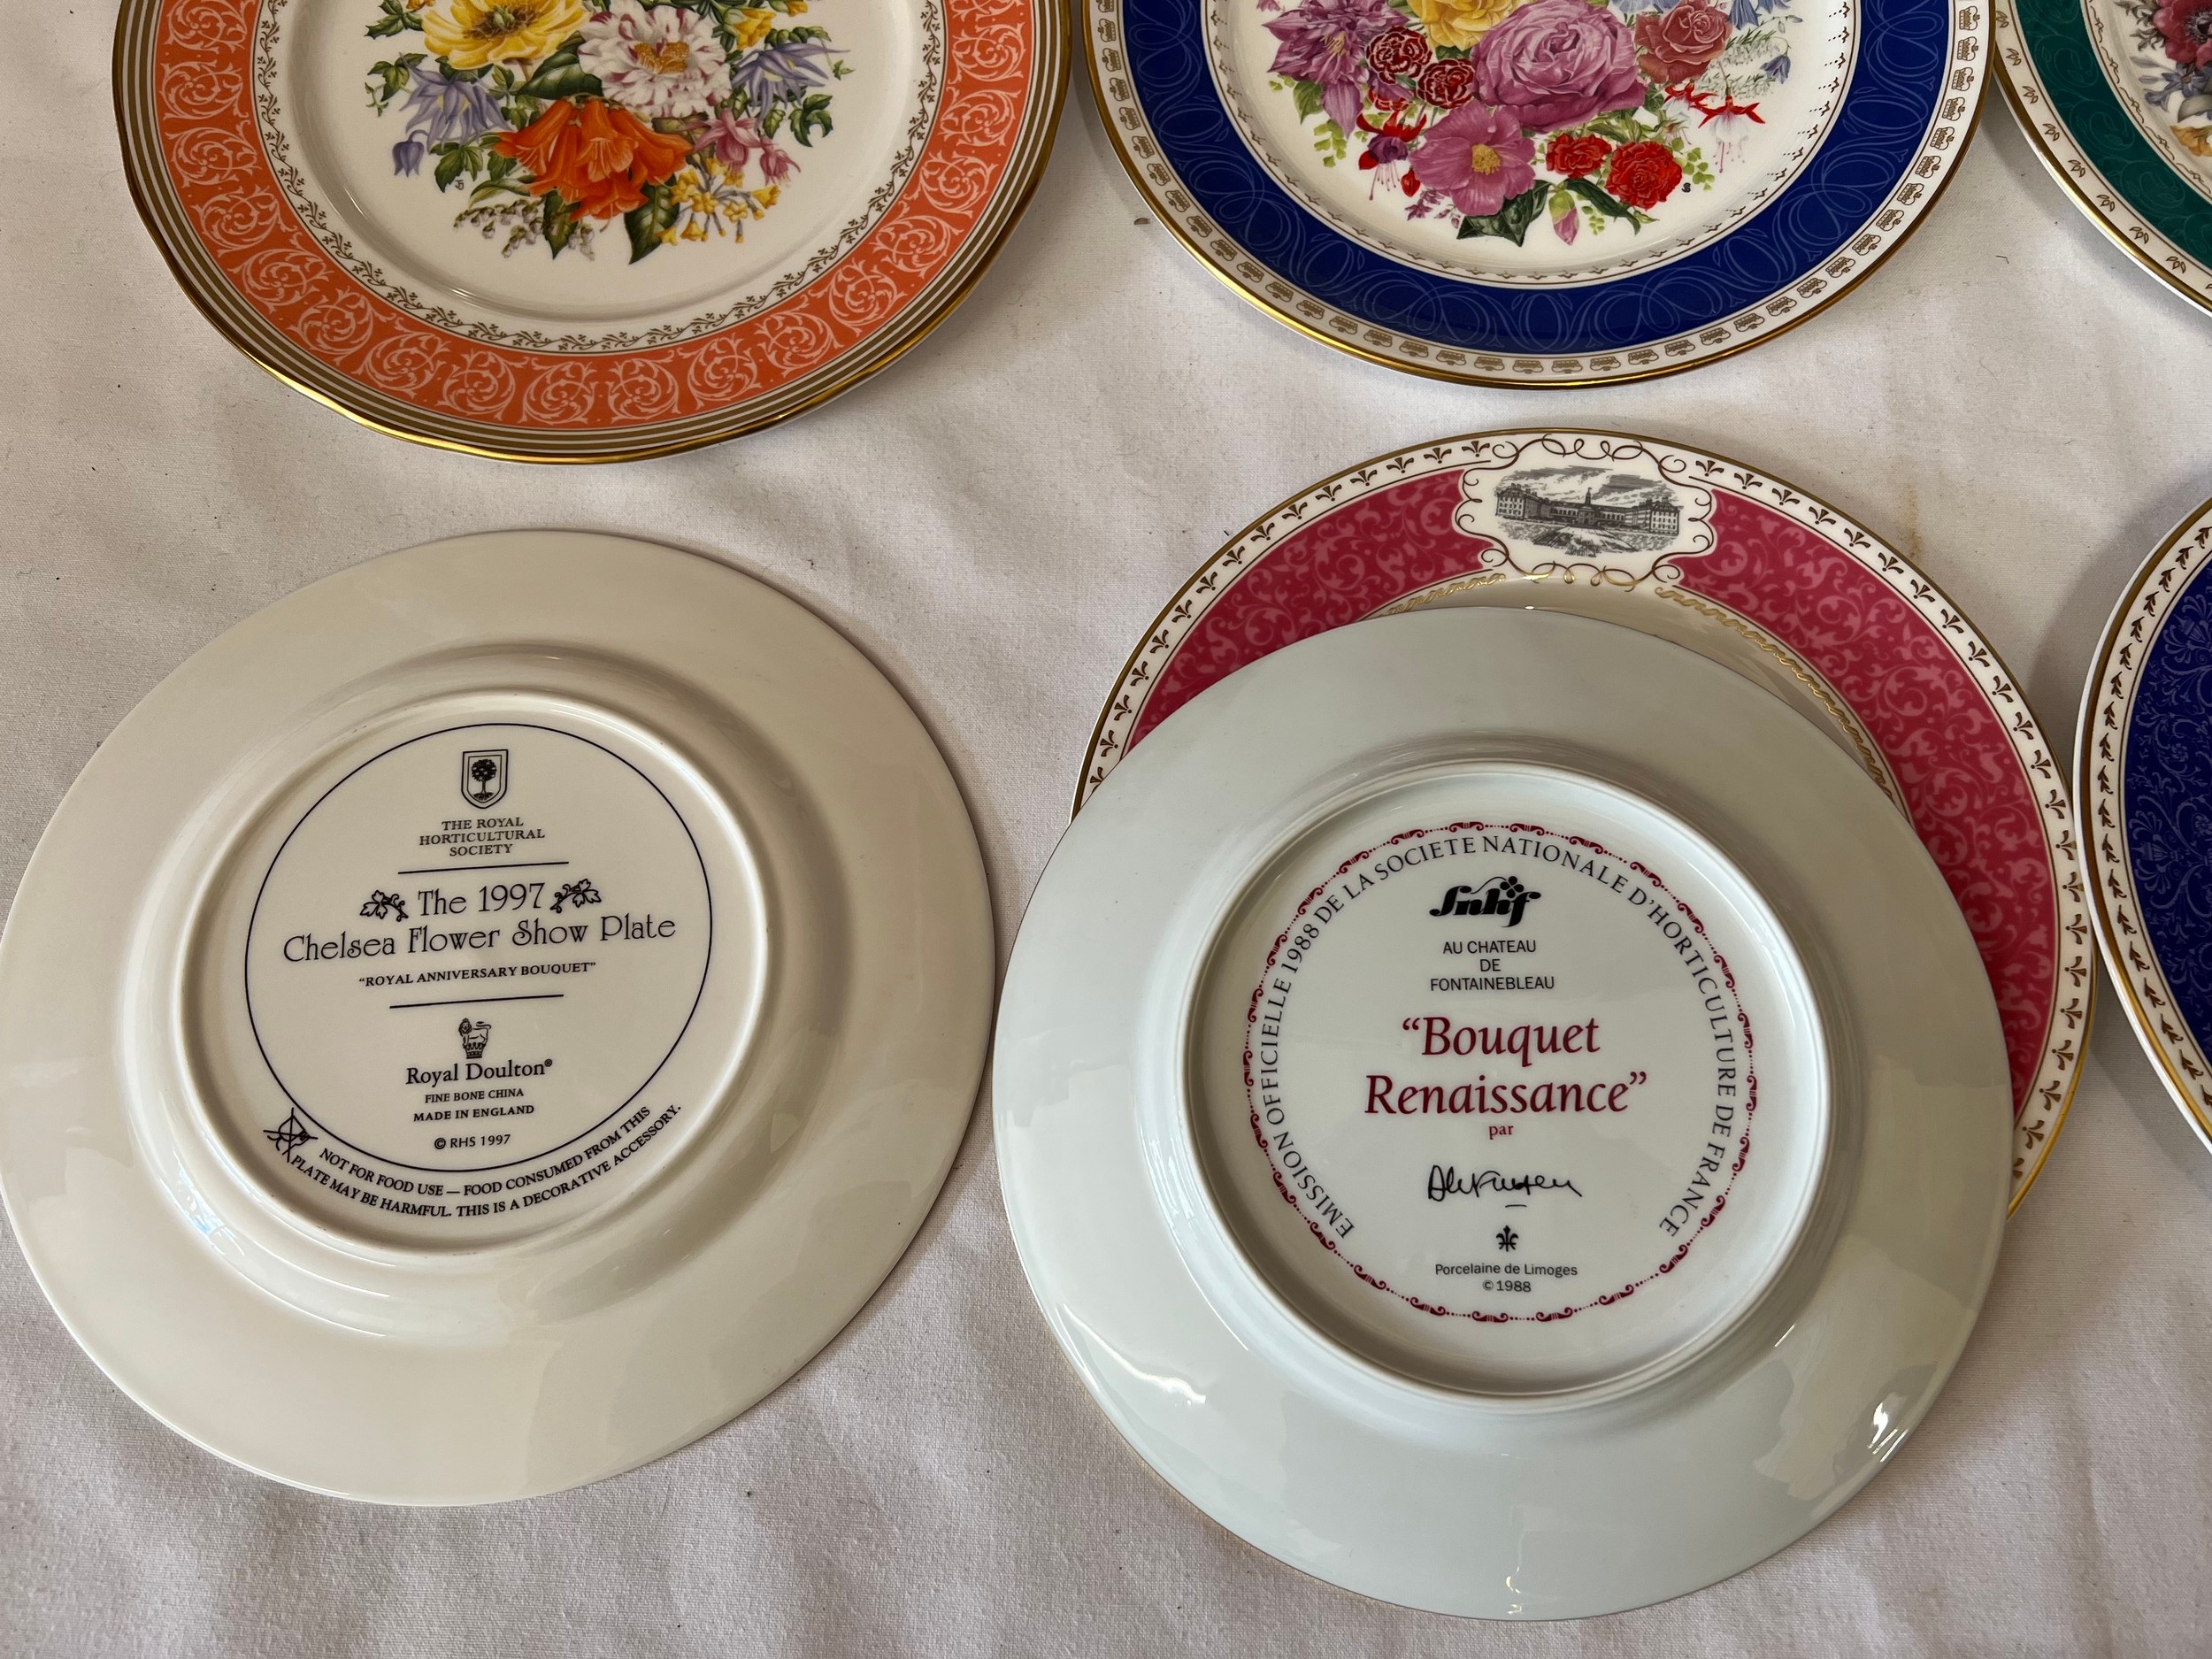 A set of 15 Royal Doulton plates for The Roal Horticultural Society Chelsea Flower Show Plates - Image 2 of 3